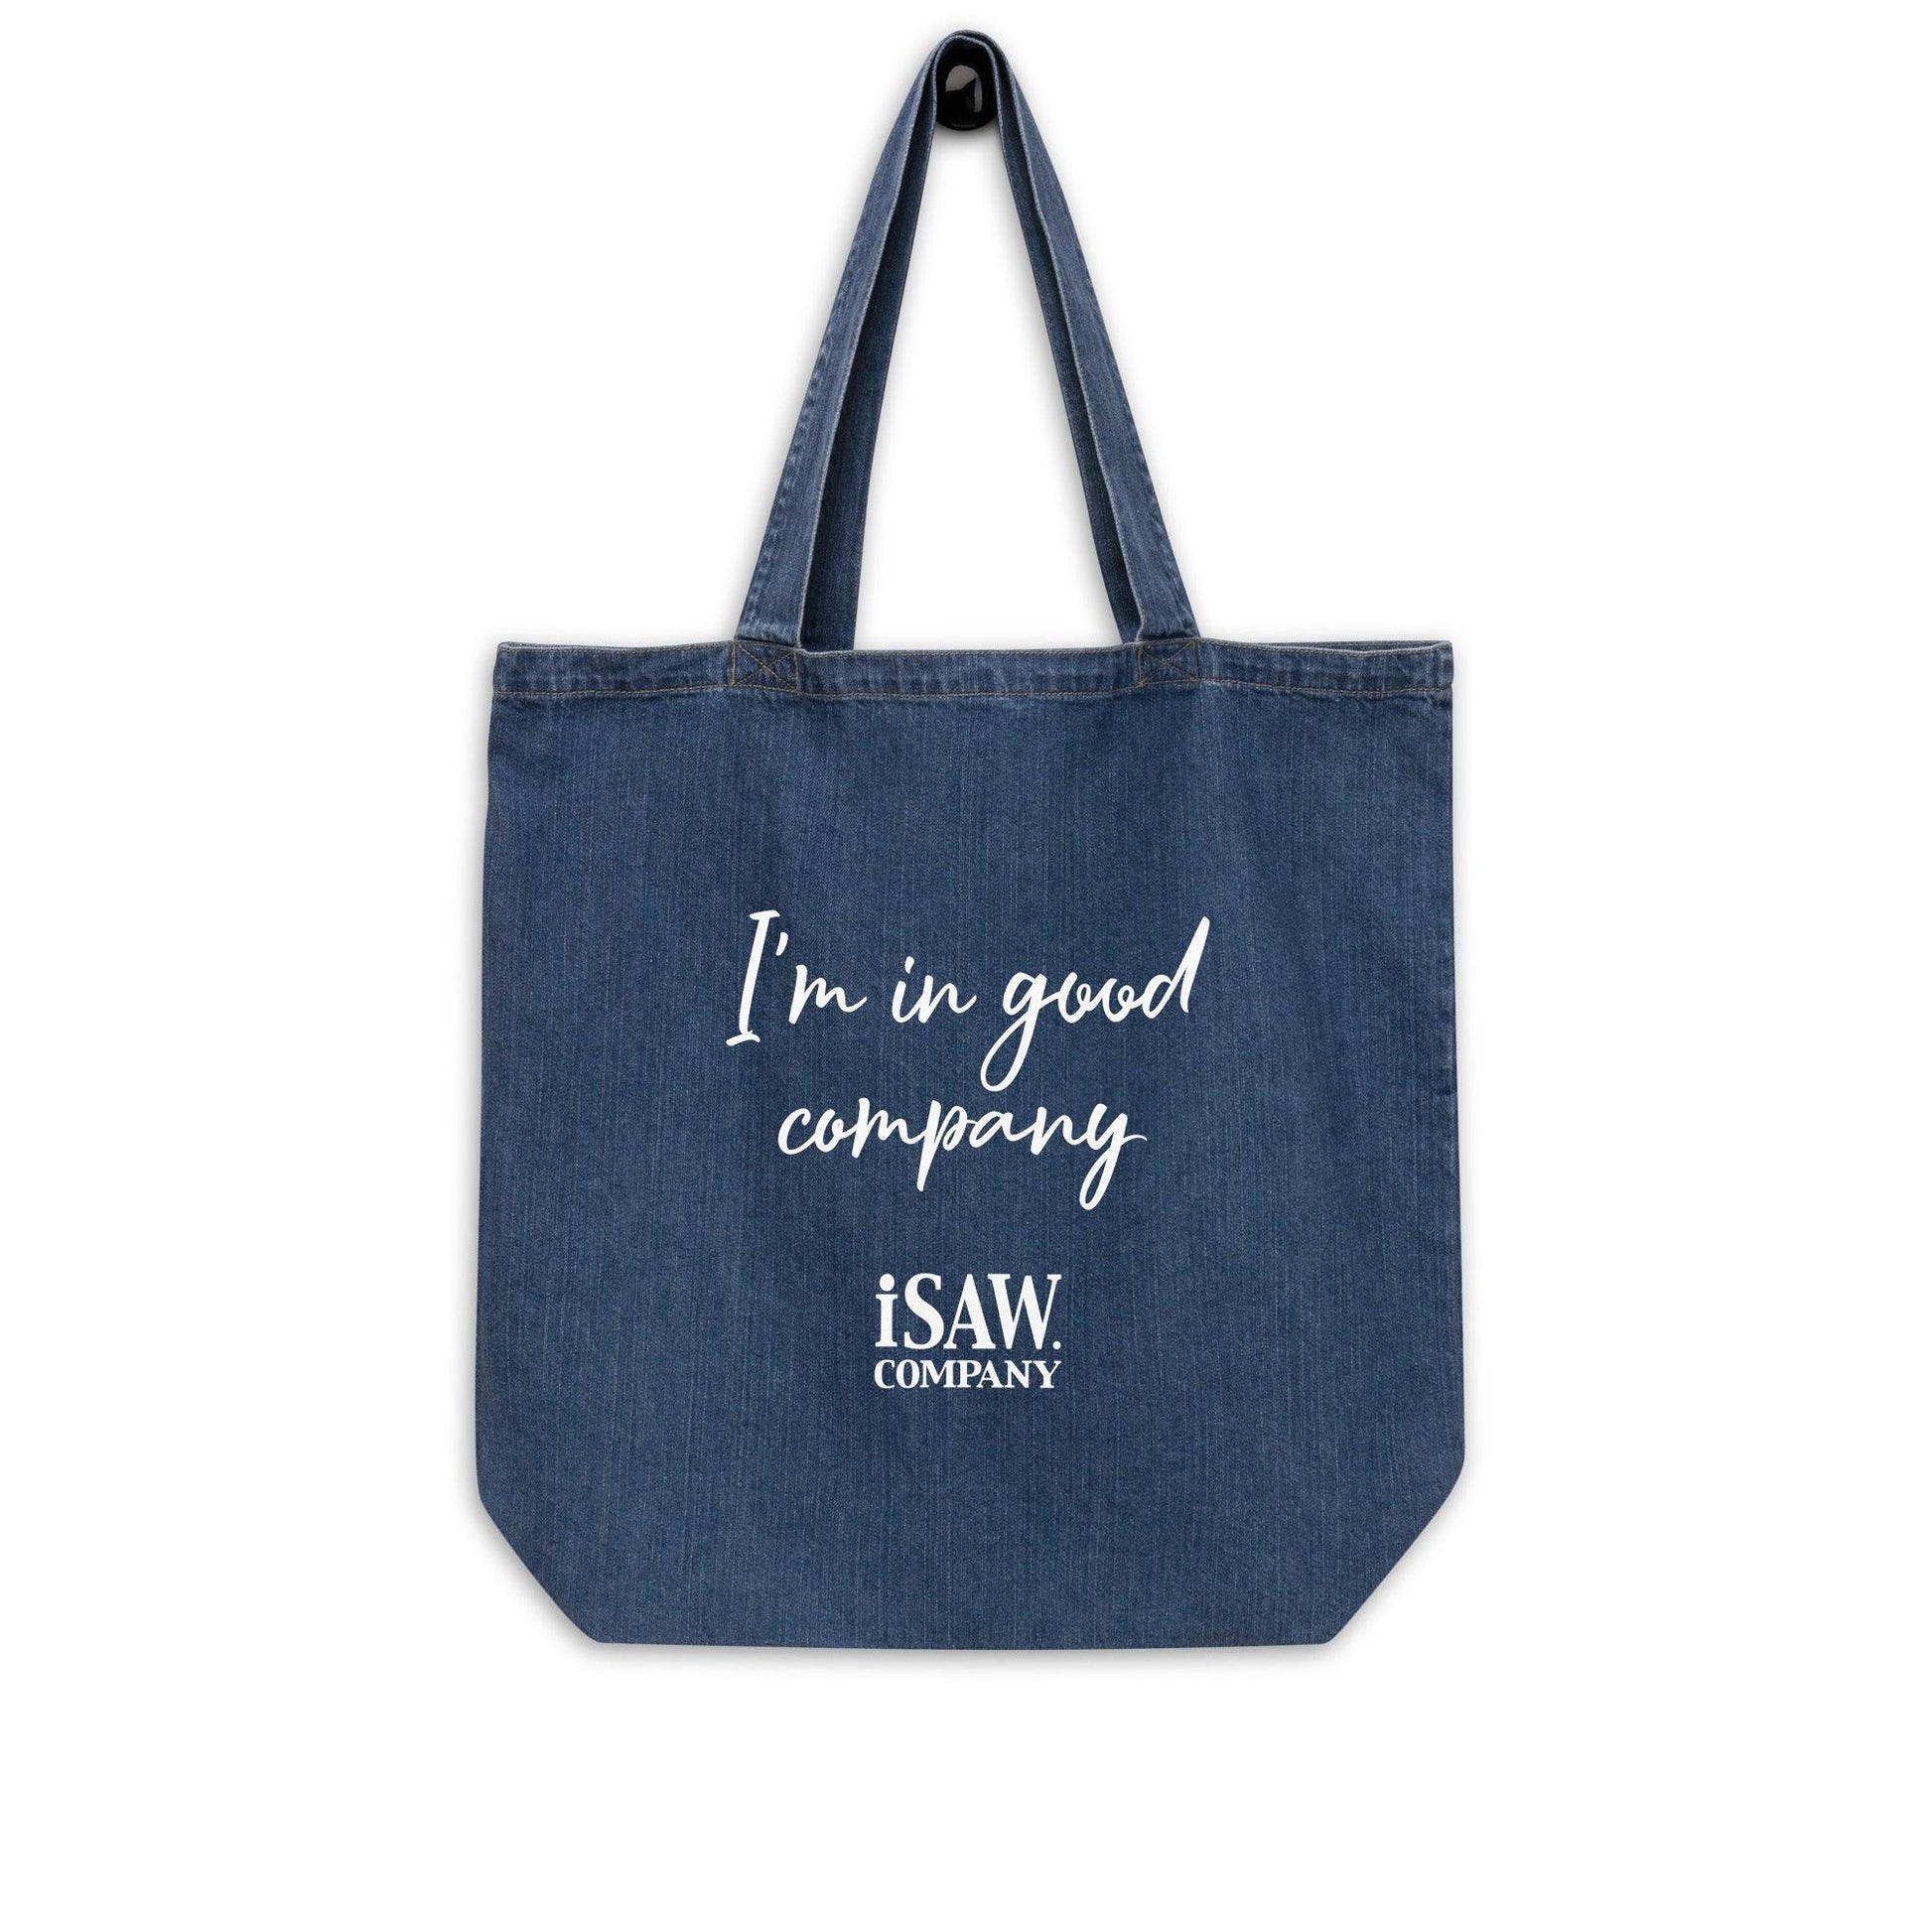 iSAW Denim Tote Bag - iSAW Company